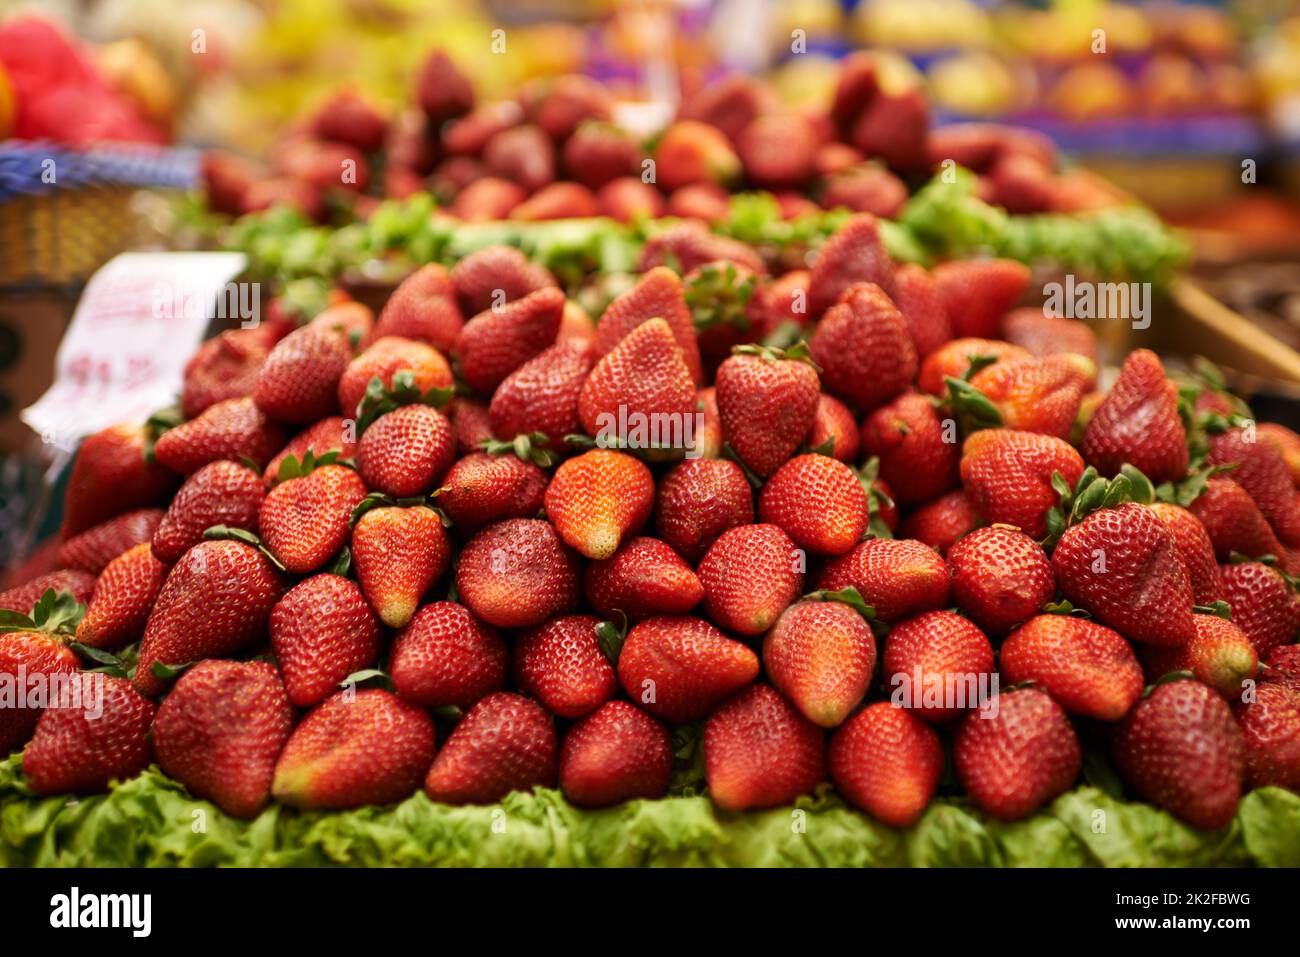 Juicy strawberries. A display of delicious red strawberries at a food market. Stock Photo